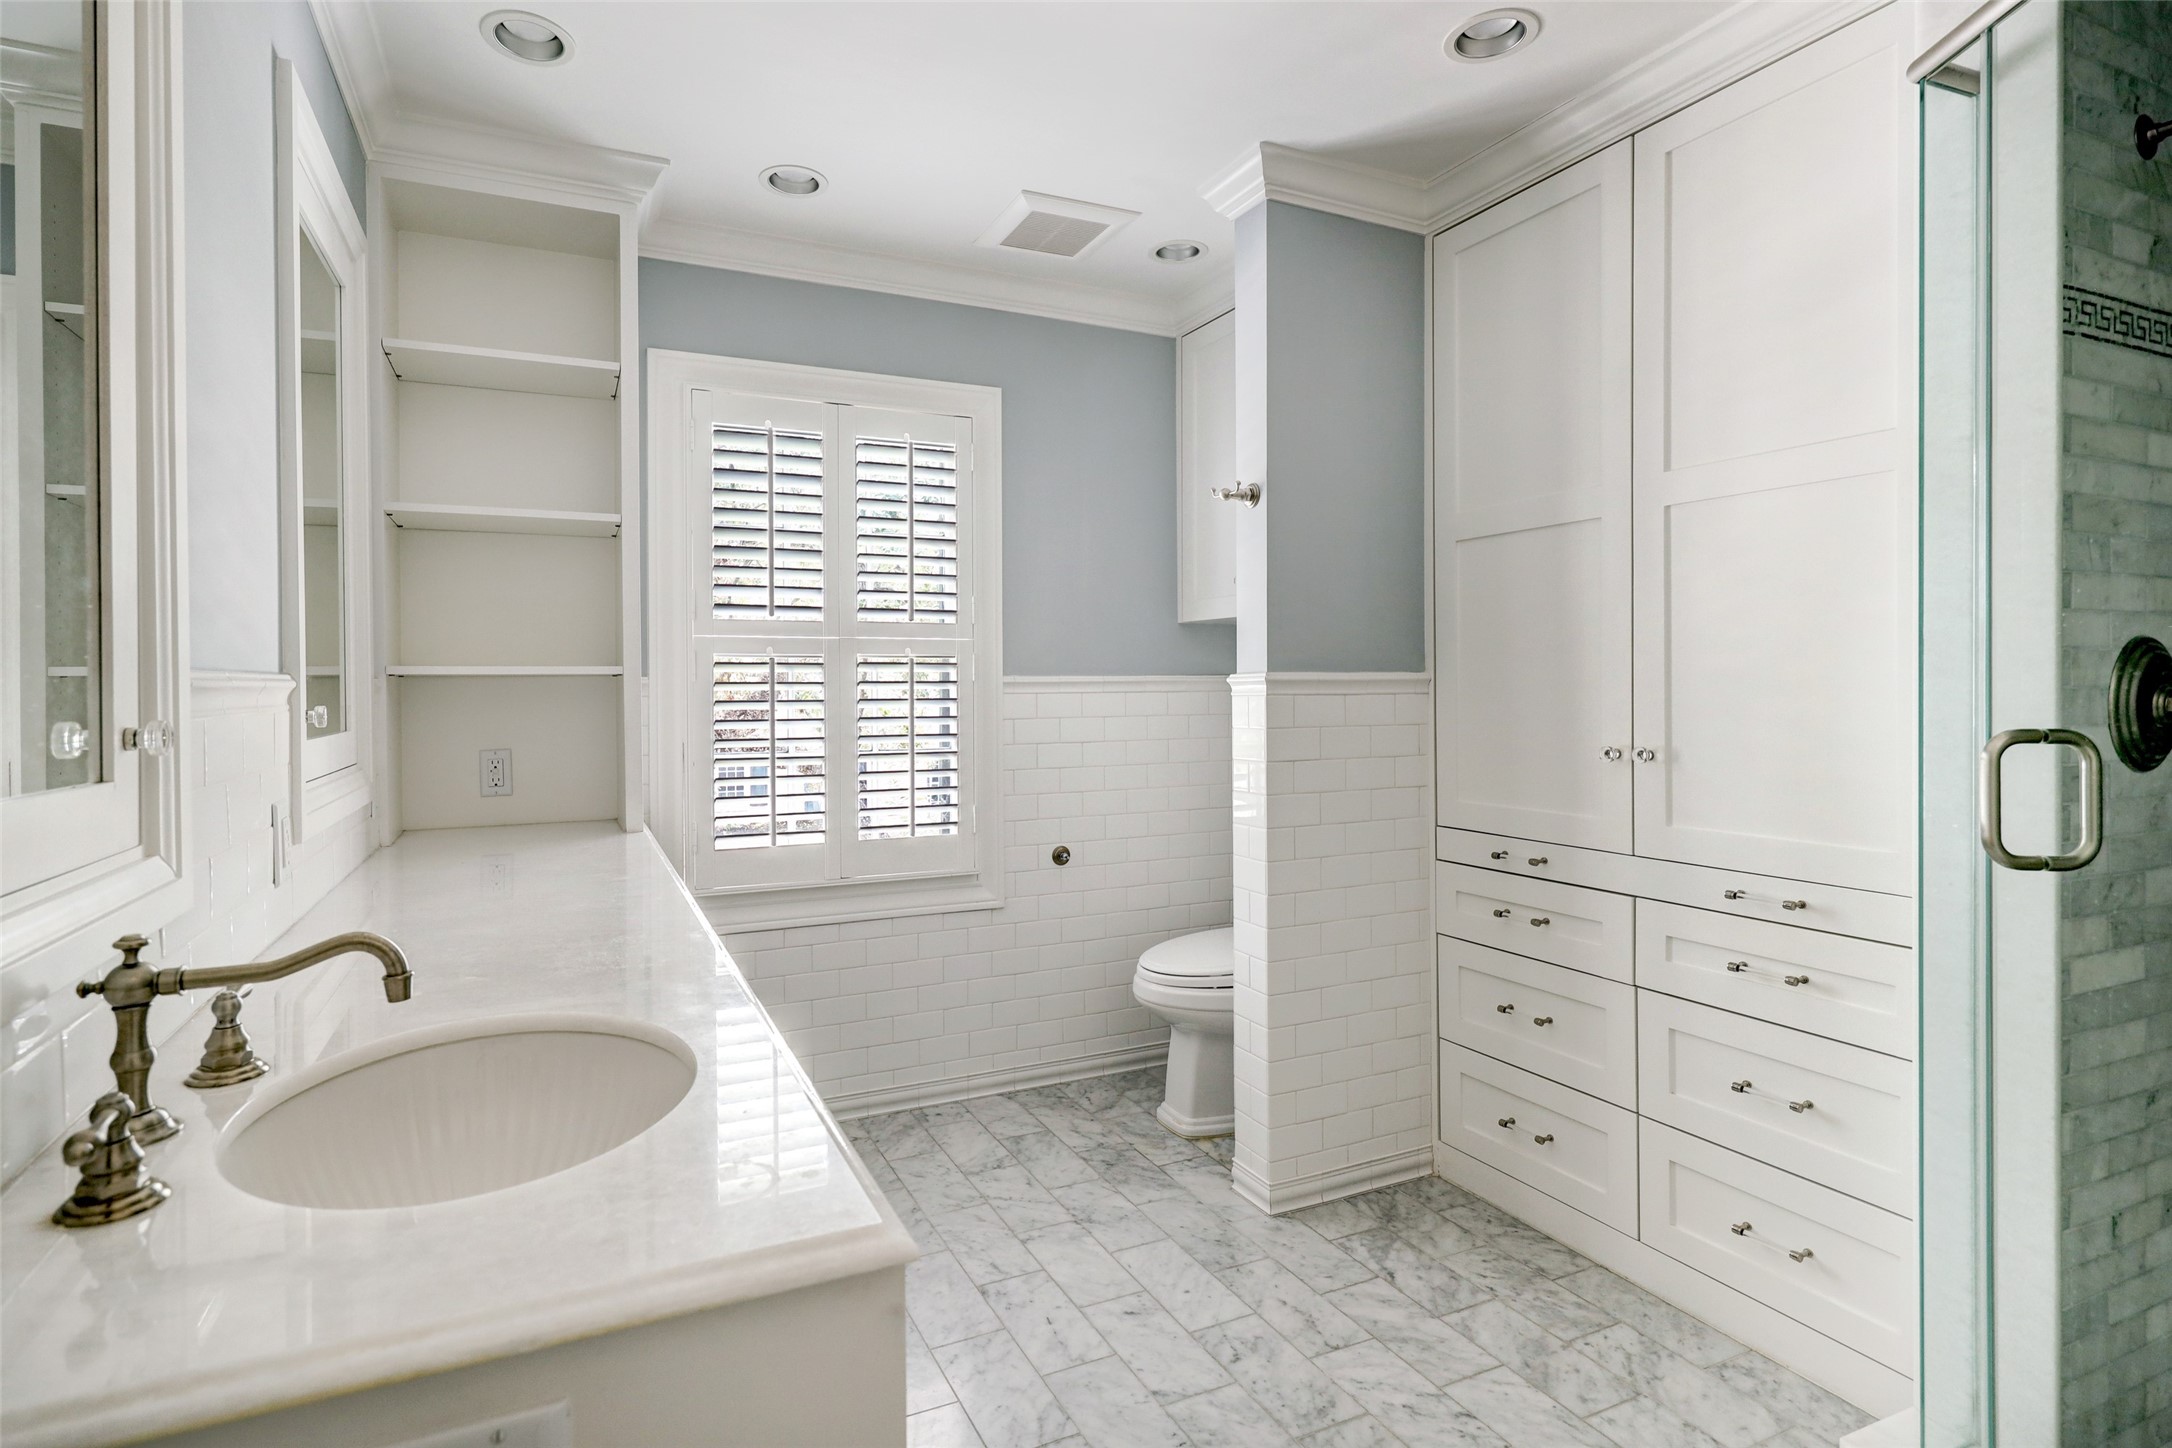 The gorgeous en-suite bathroom is a true sanctuary, offering an abundance of storage and counter space and a beautiful walk-in shower, featuring a comfortable bench for relaxation and a spa-like experience.